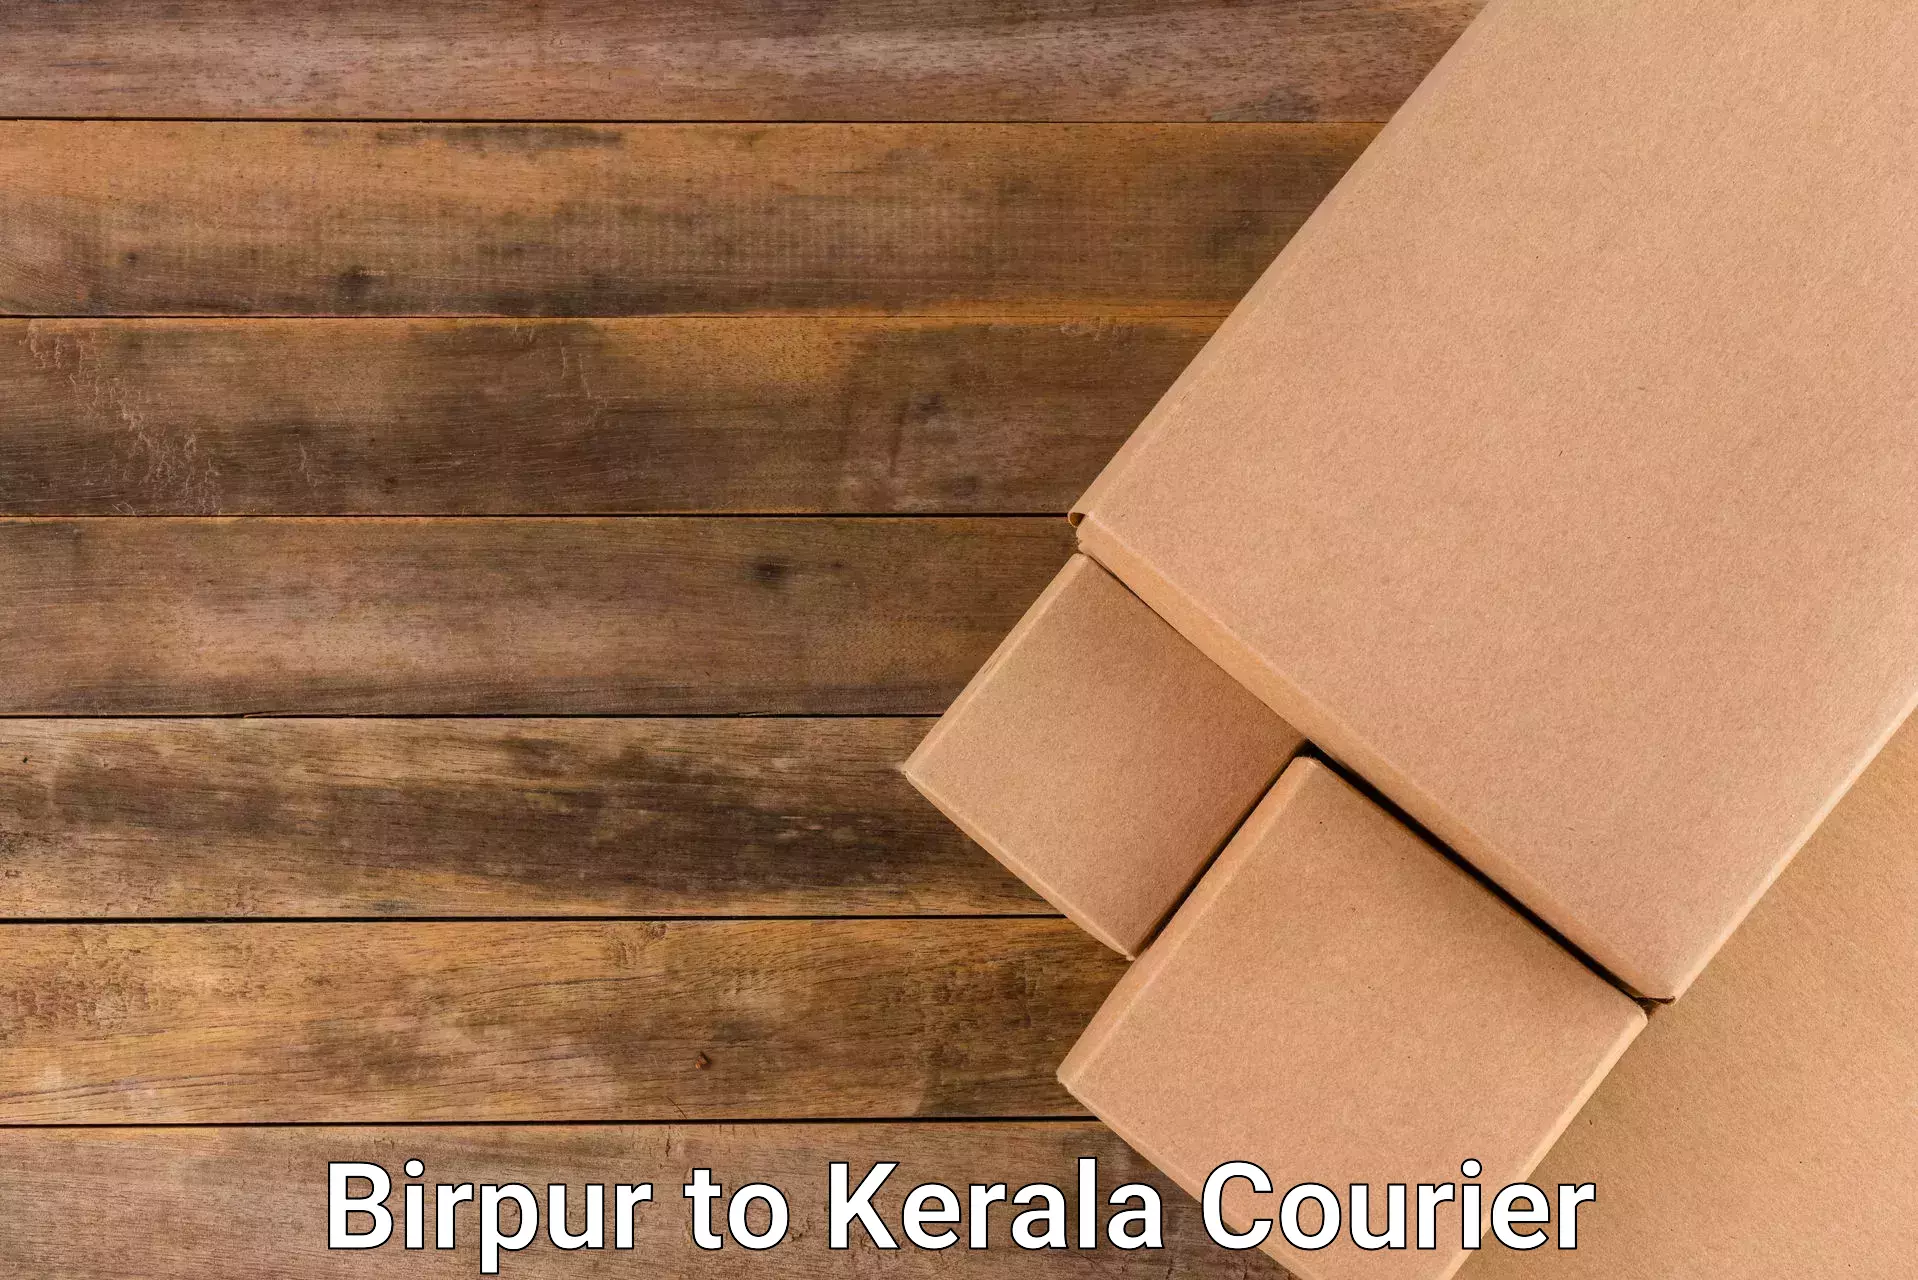 Courier service innovation Birpur to Angamaly